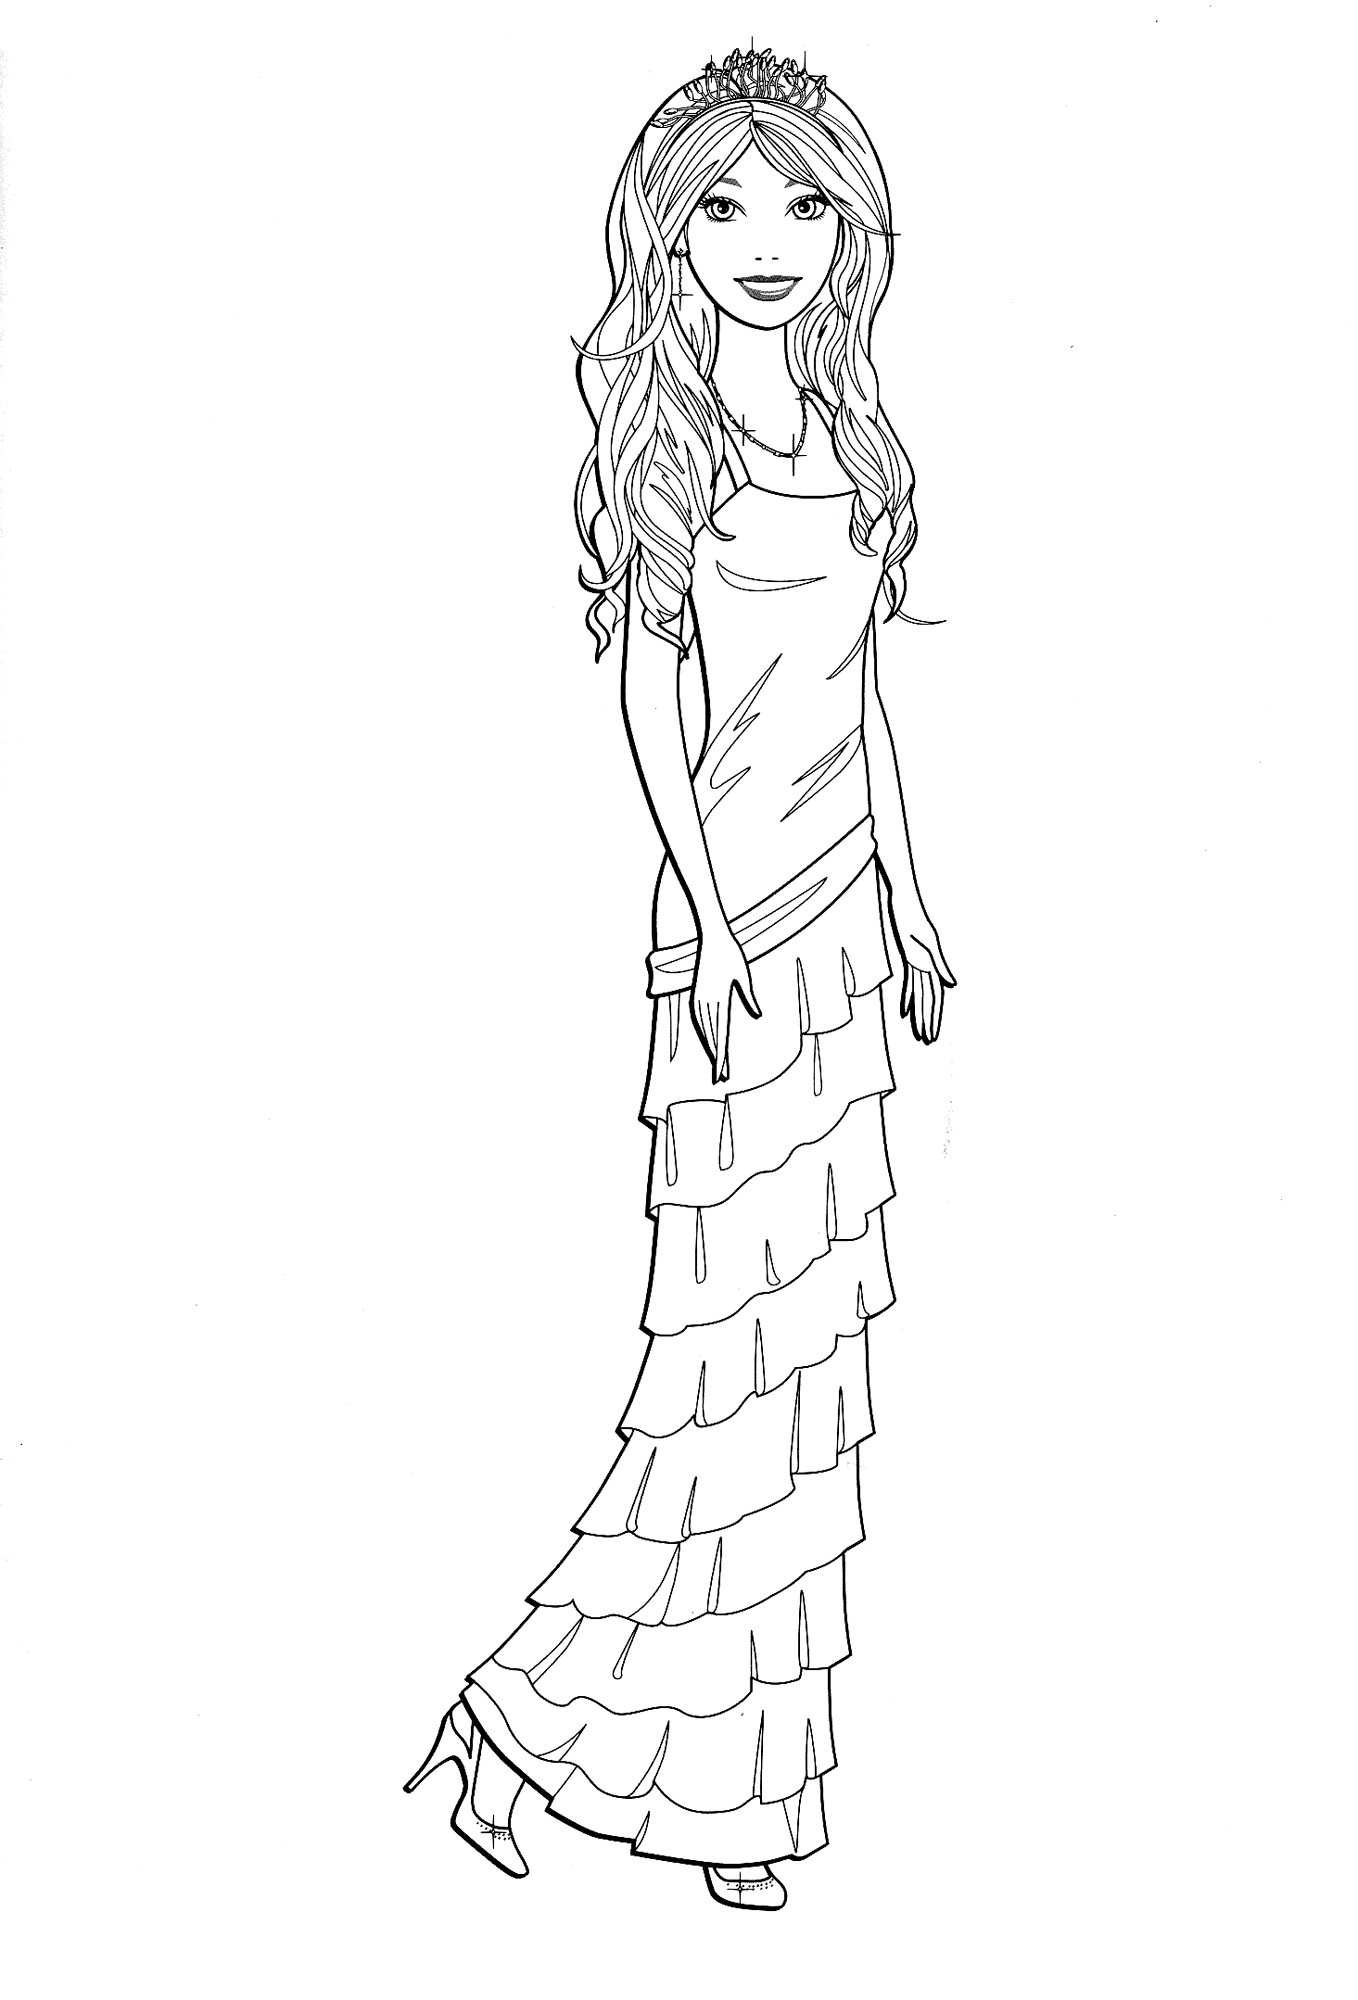 Coloring page - Barbie in an elegant dress